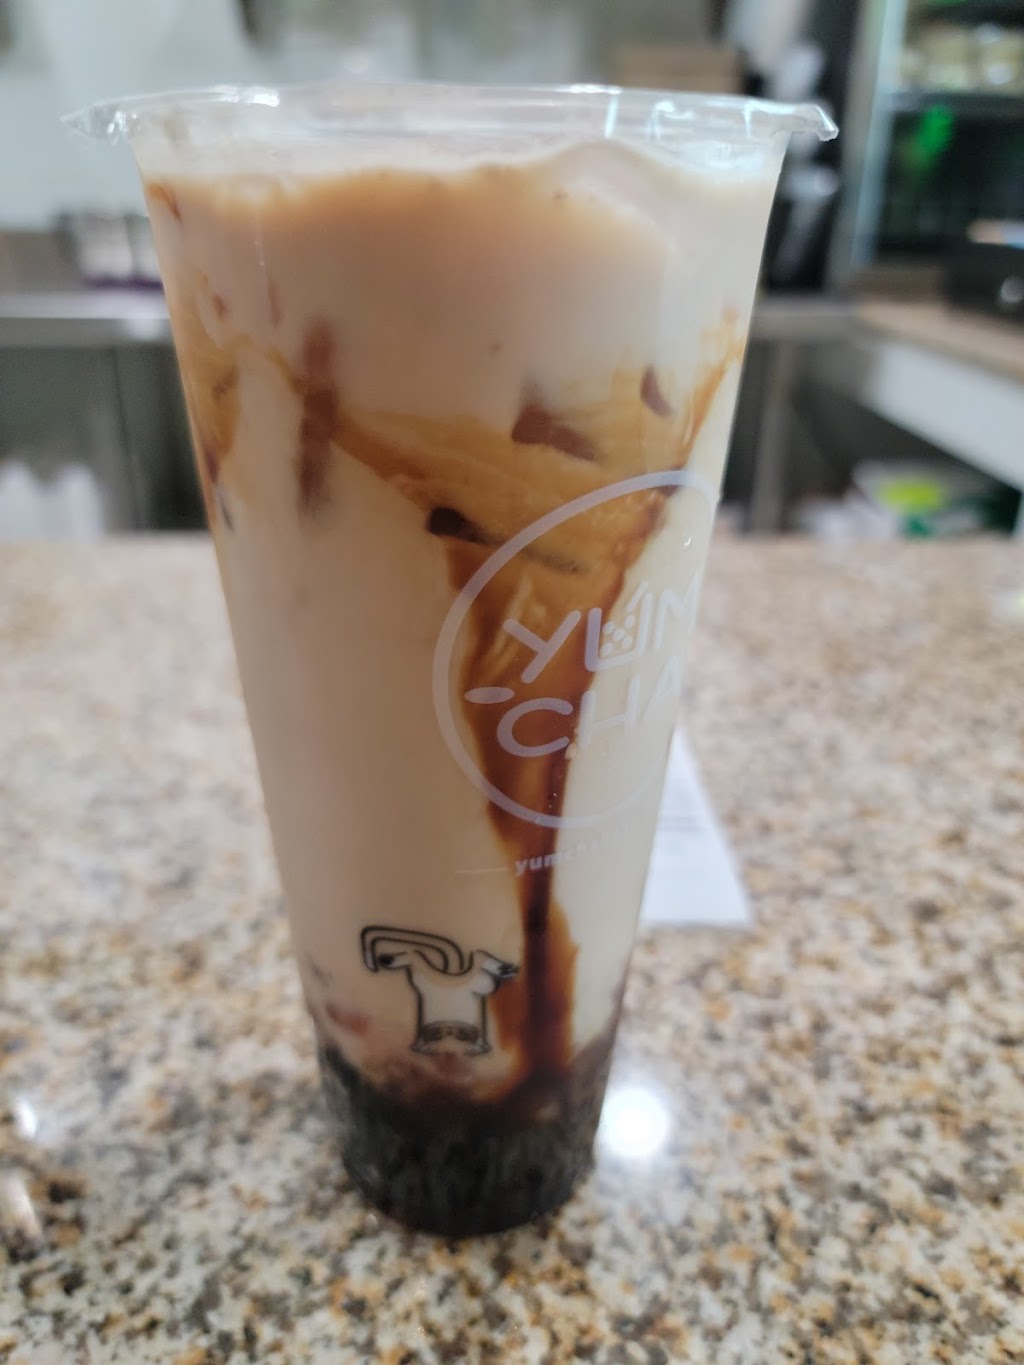 Yum Cha Boba Tea & More | 380 W Country Club Dr, Brentwood, CA 94513 | Phone: (925) 666-8917